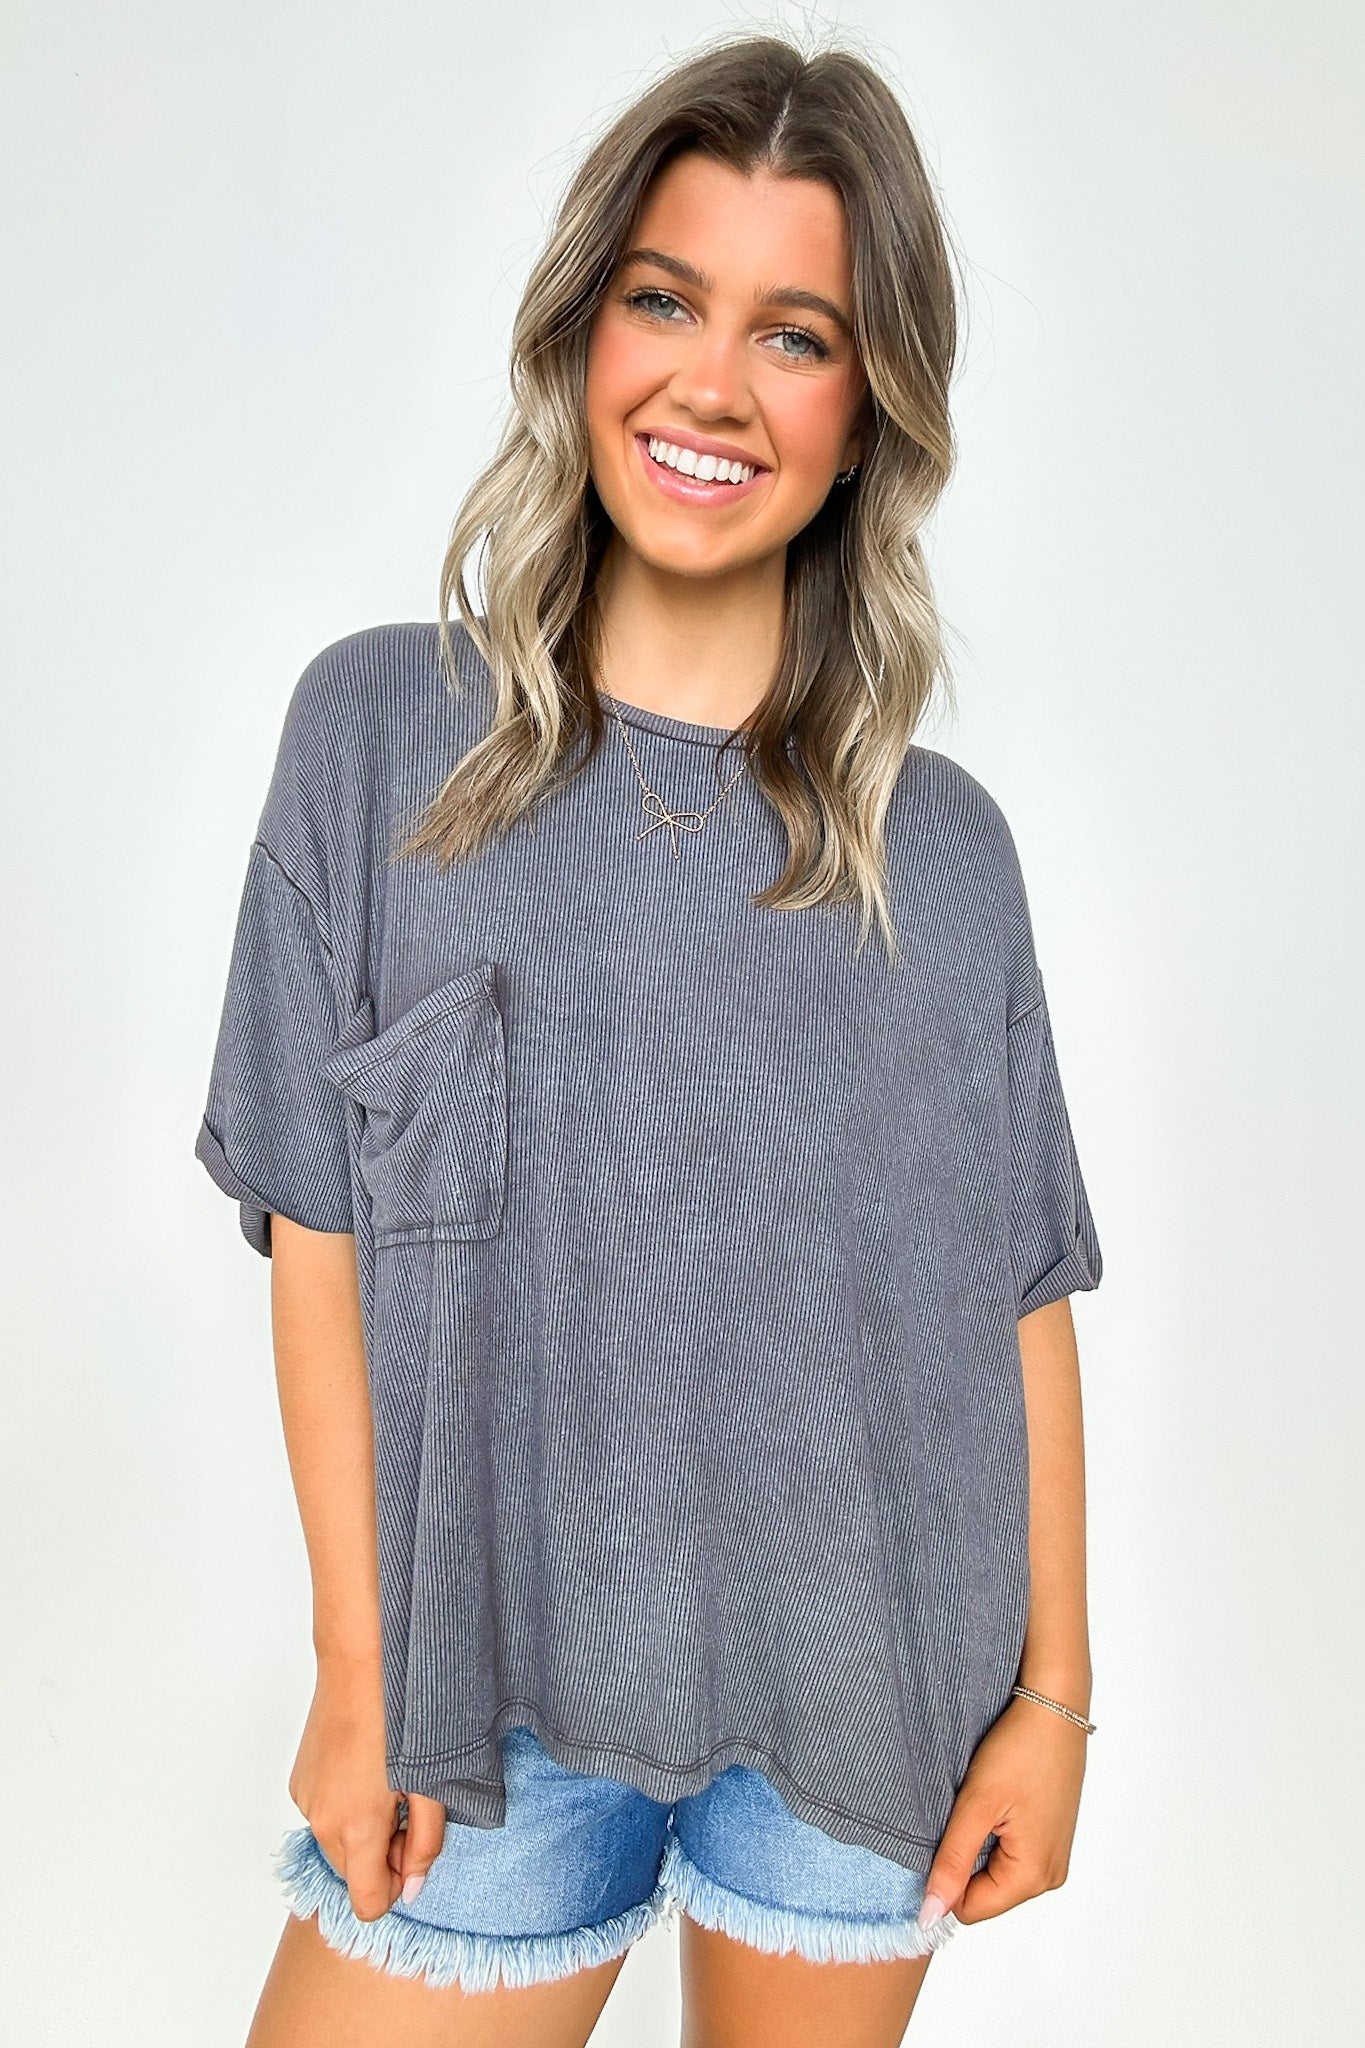 Ash Gray / SM Rylee Mineral Wash Ribbed Relaxed Pocket Top - BACK IN STOCK - Madison and Mallory